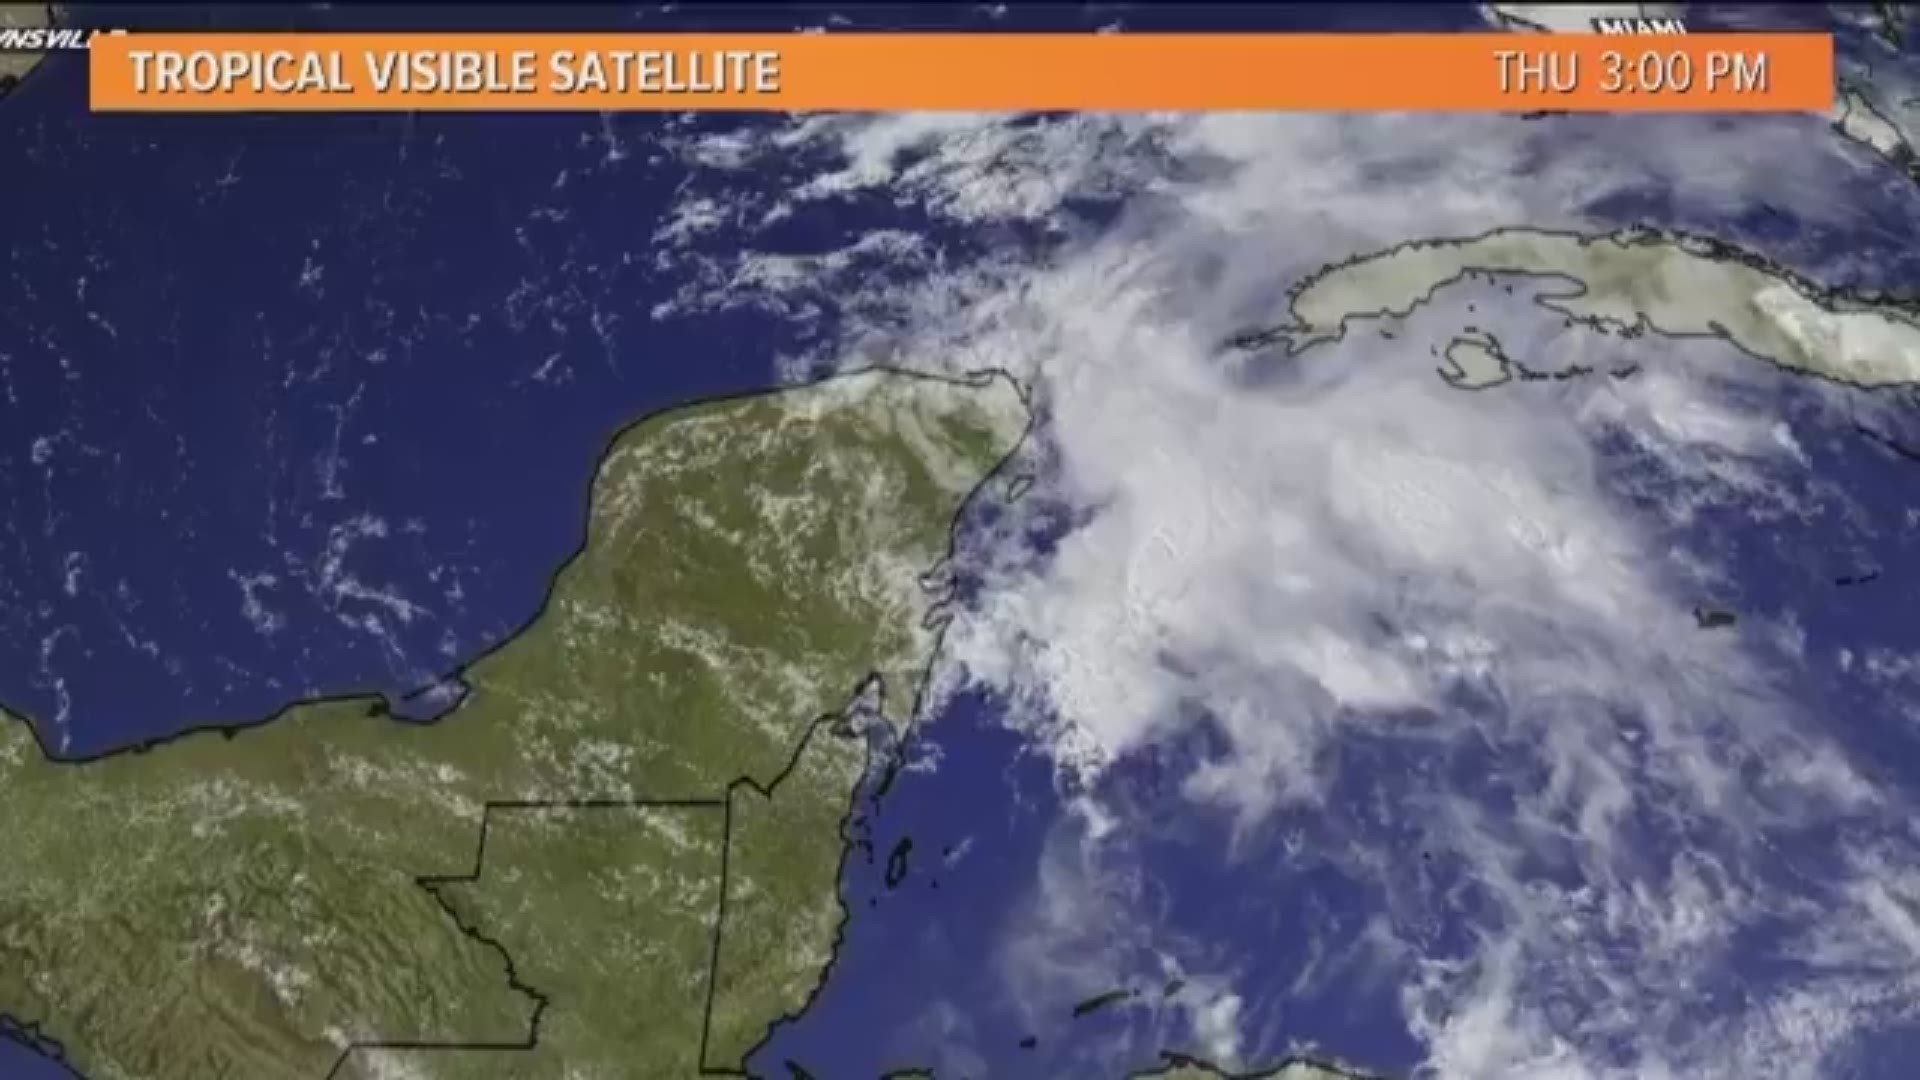 Chief Meteorologist Carl Arredondo has an update on Invest 90 and what to expect this weekend.